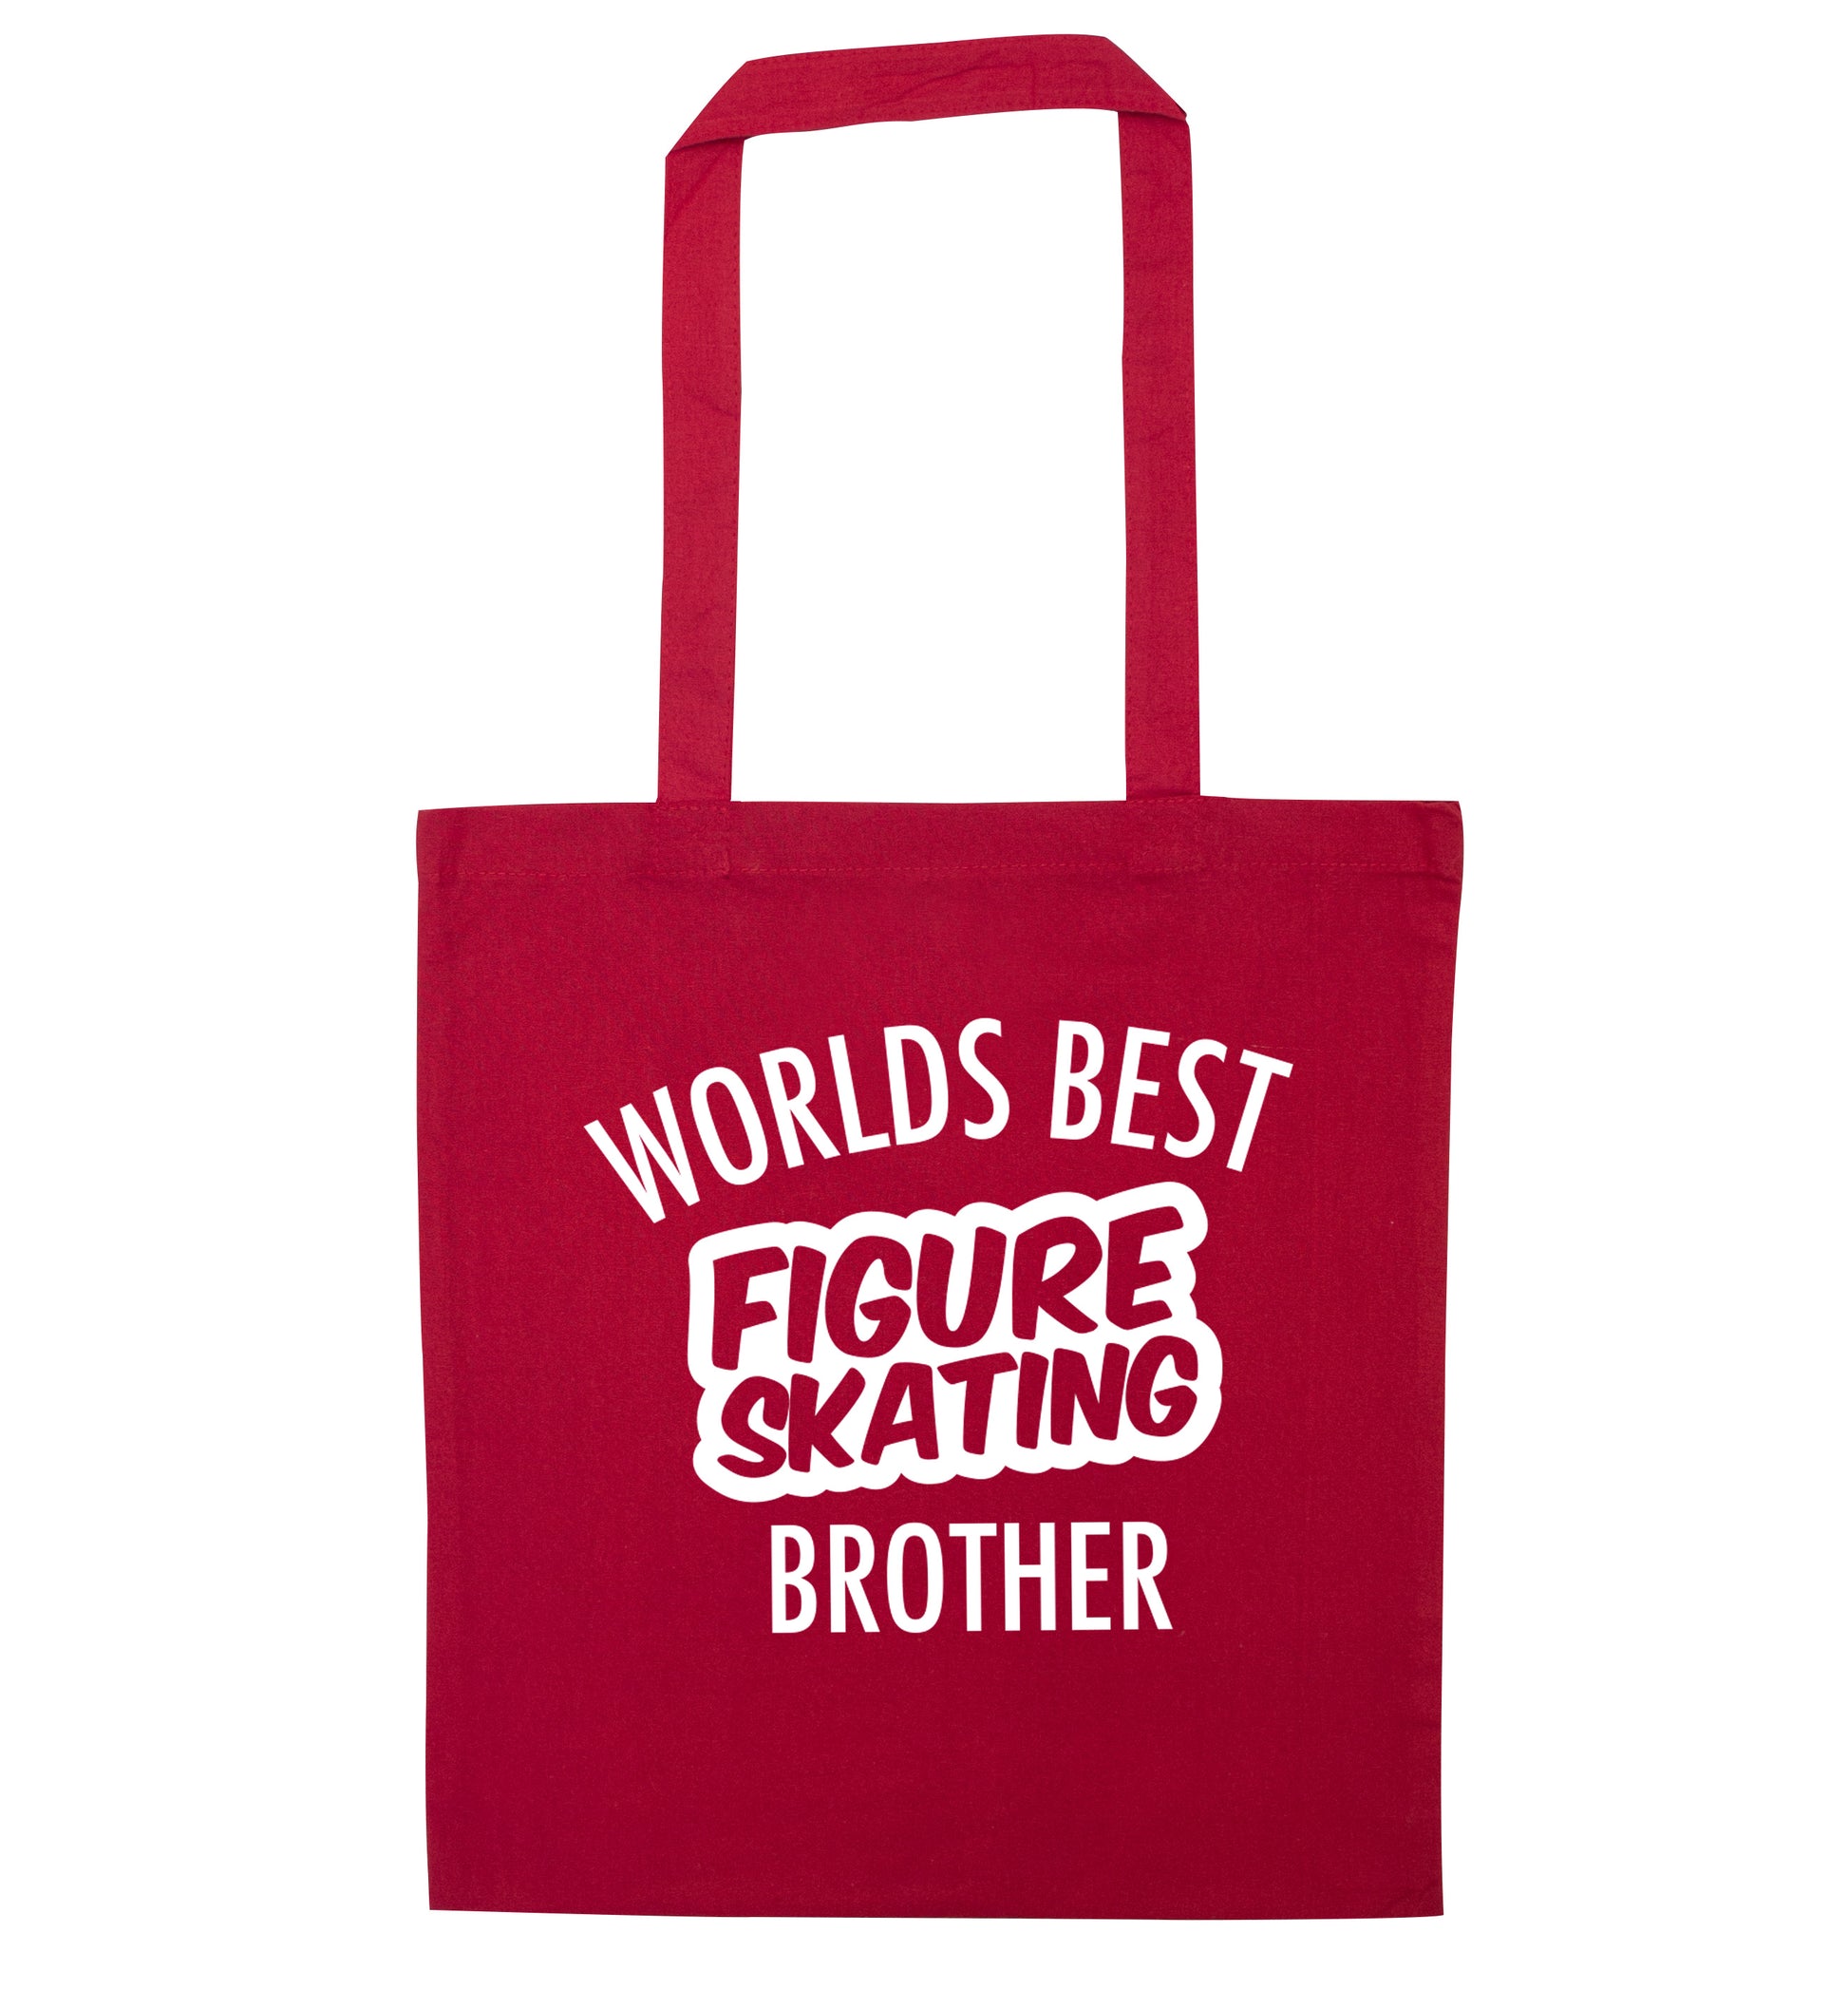 Worlds best figure skating brother red tote bag